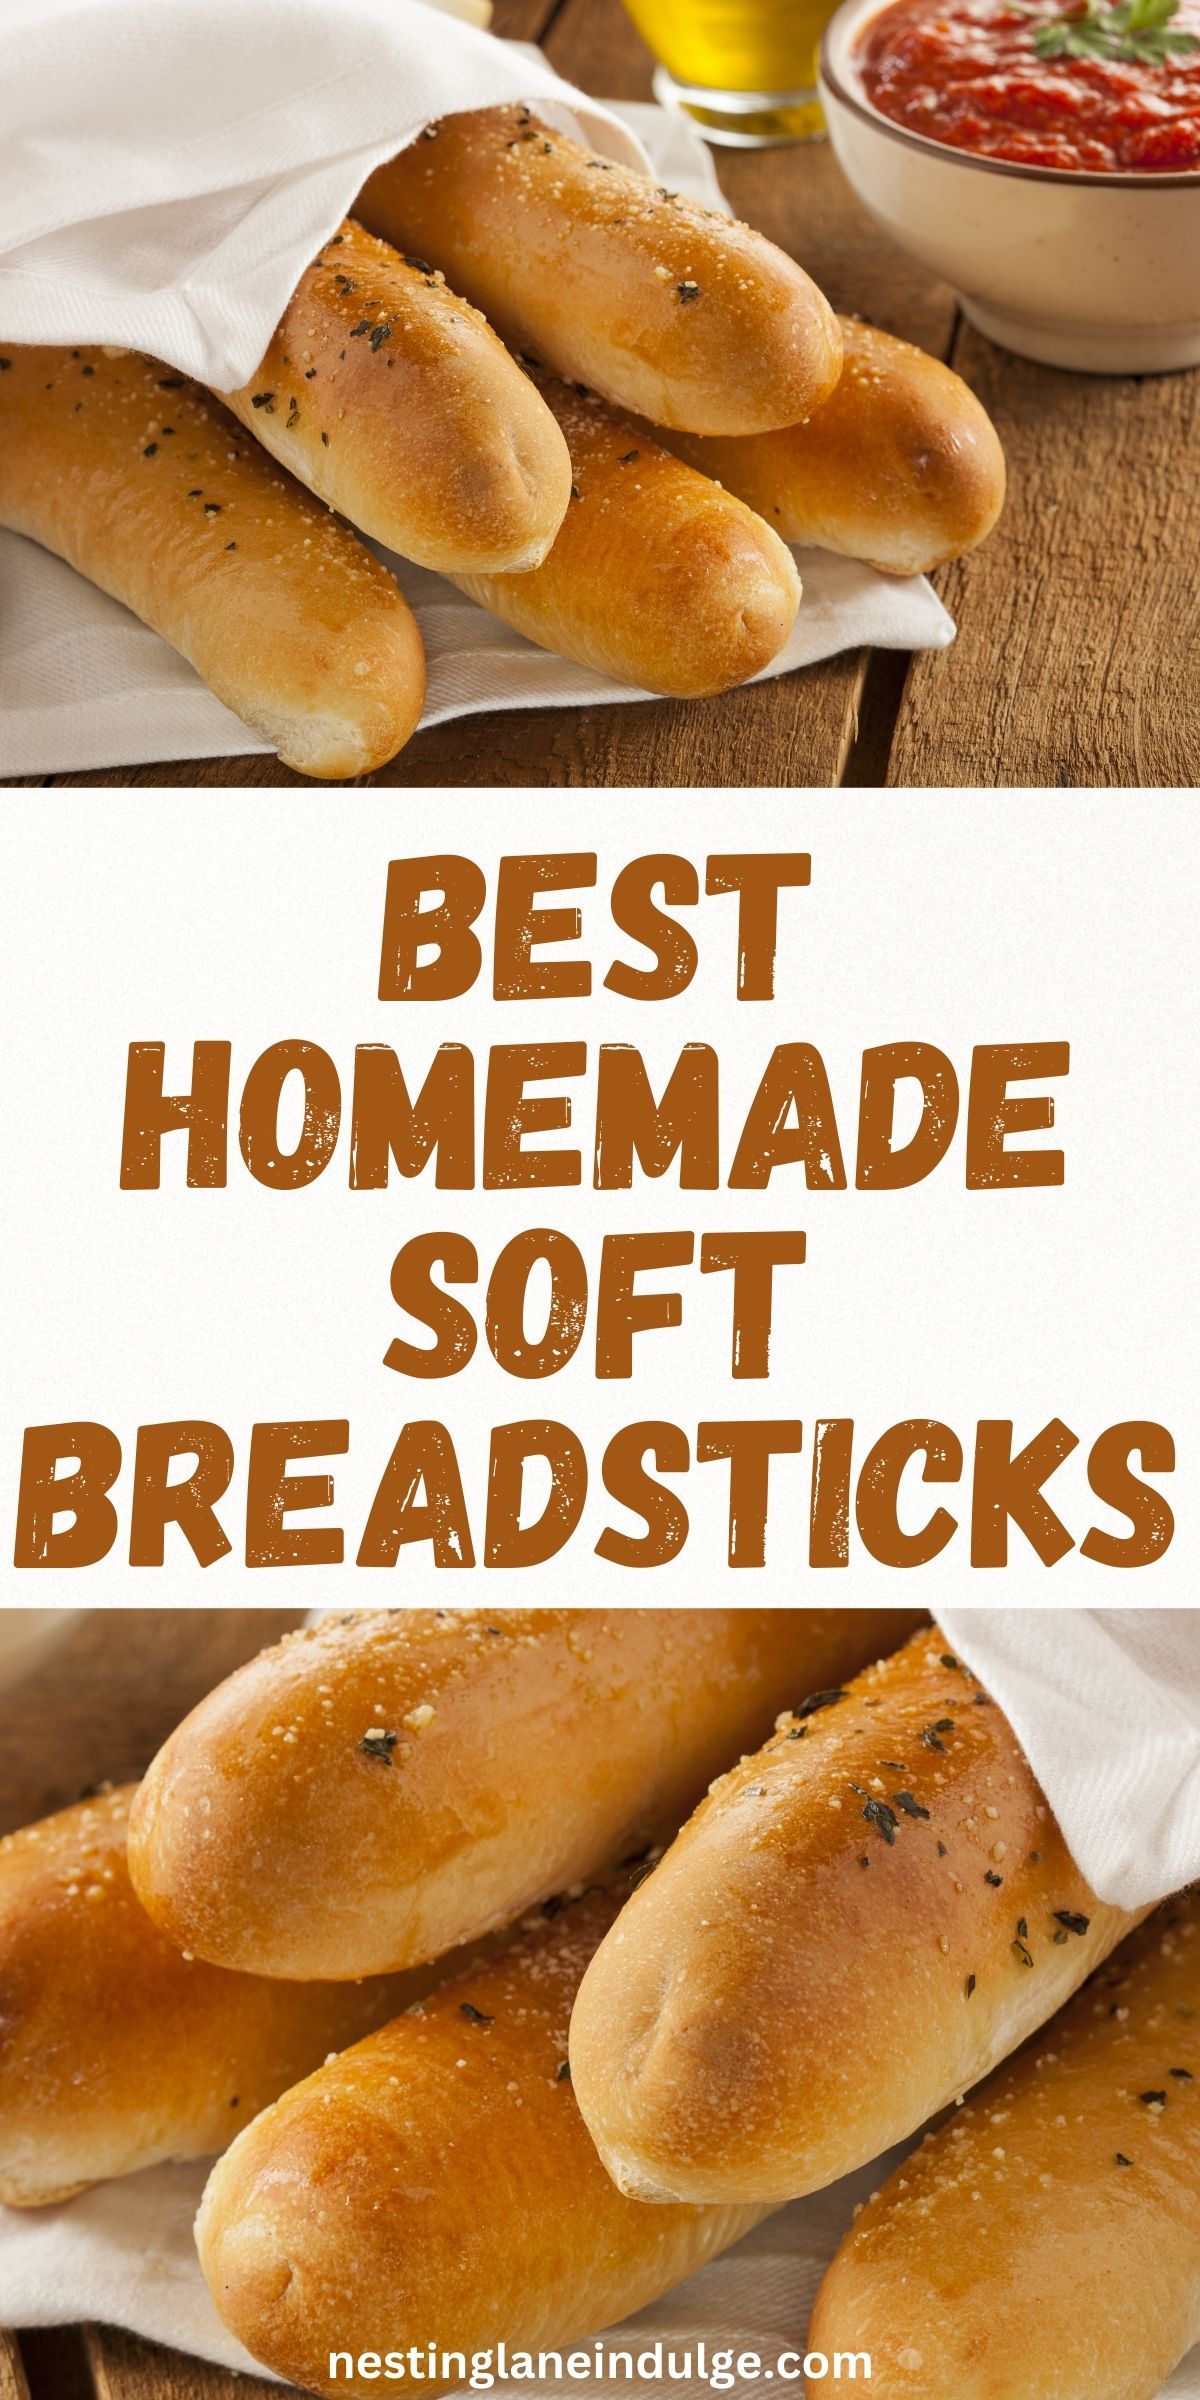 A promotional image for homemade soft breadsticks featuring several golden-brown breadsticks underneath a white cloth napkin. In the background, there's a small bowl of marinara sauce and a glass of olive oil, all atop a wooden table. Large, bold text at the top reads 'Homemade Soft Breadsticks' in an orange font against a pale background, with the website 'nestinglaneindulge.com' at the bottom.